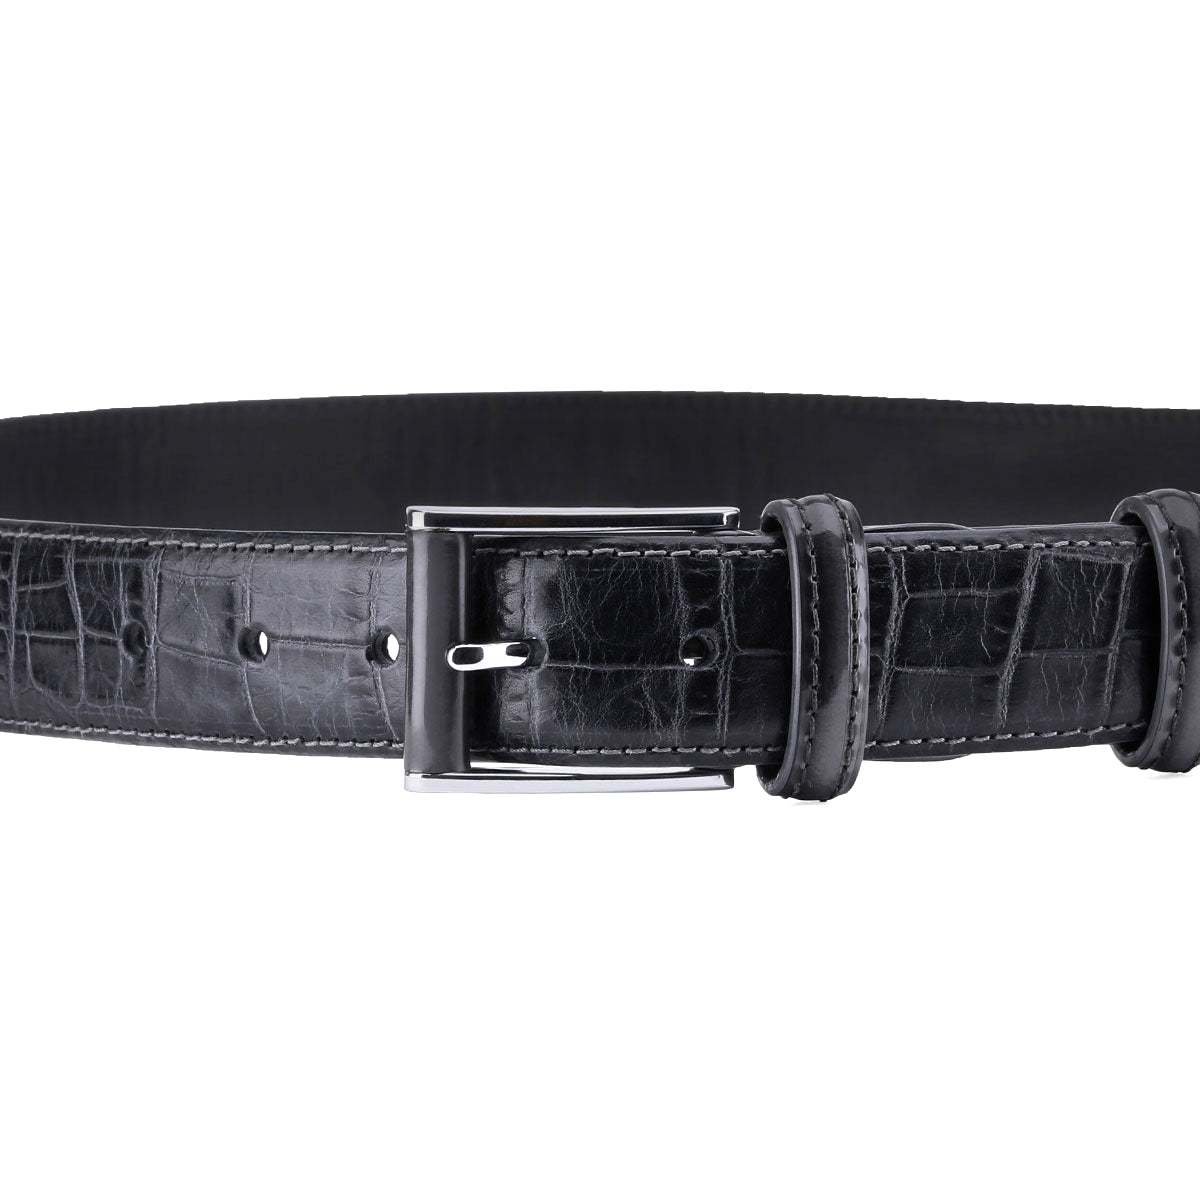 Black leather belt with gray tone